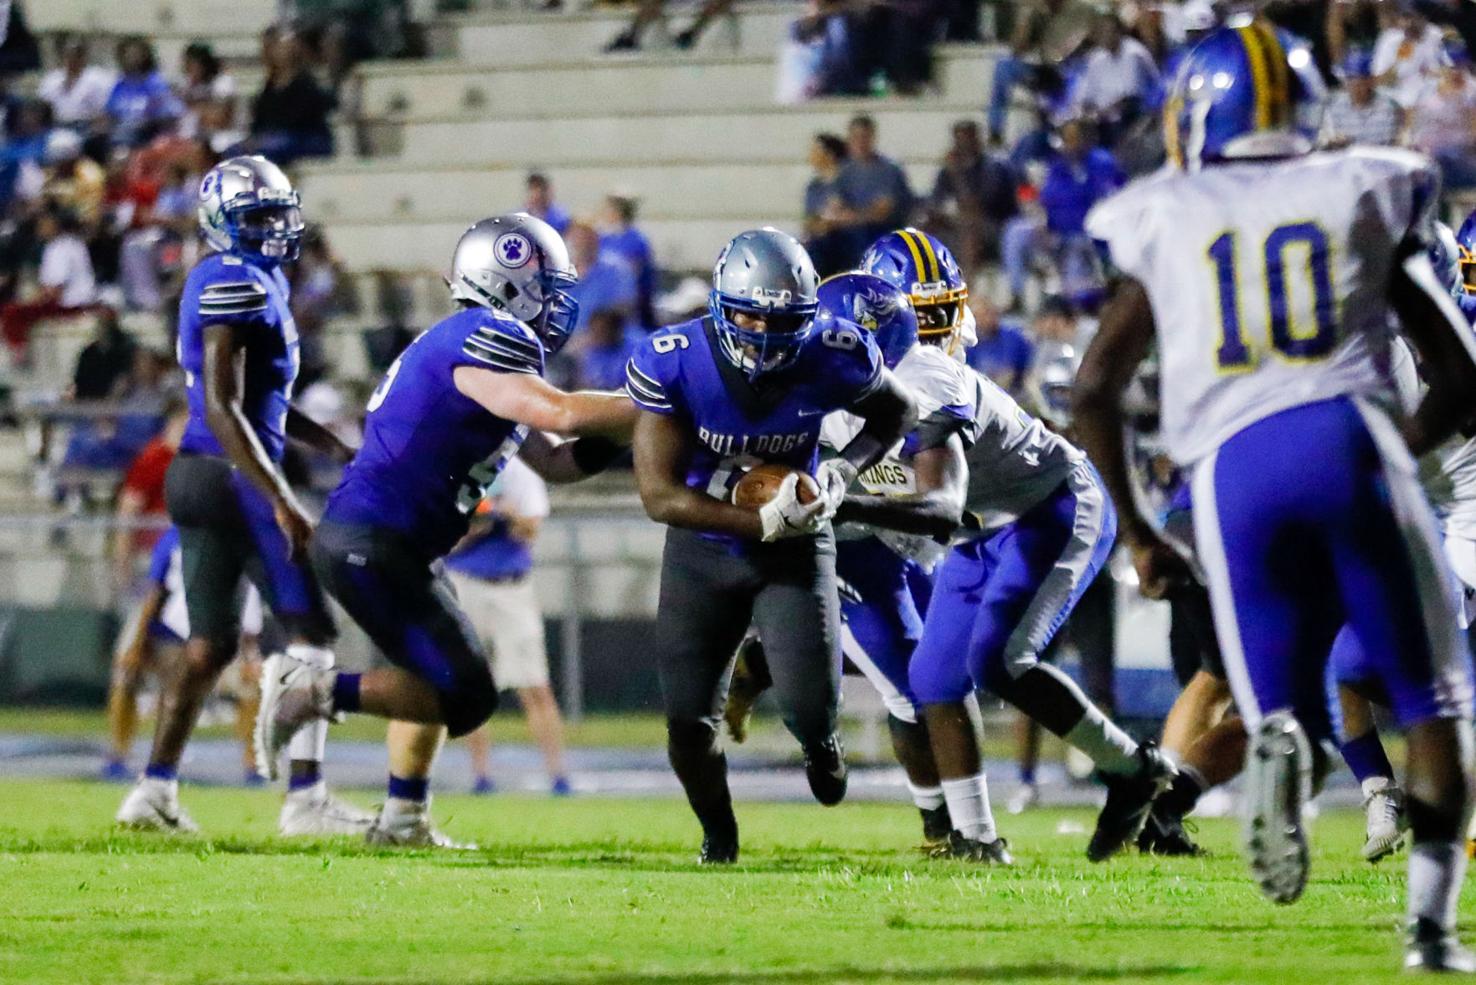 Silver Bluff High reschedules upcoming game due to COVID-19 case at